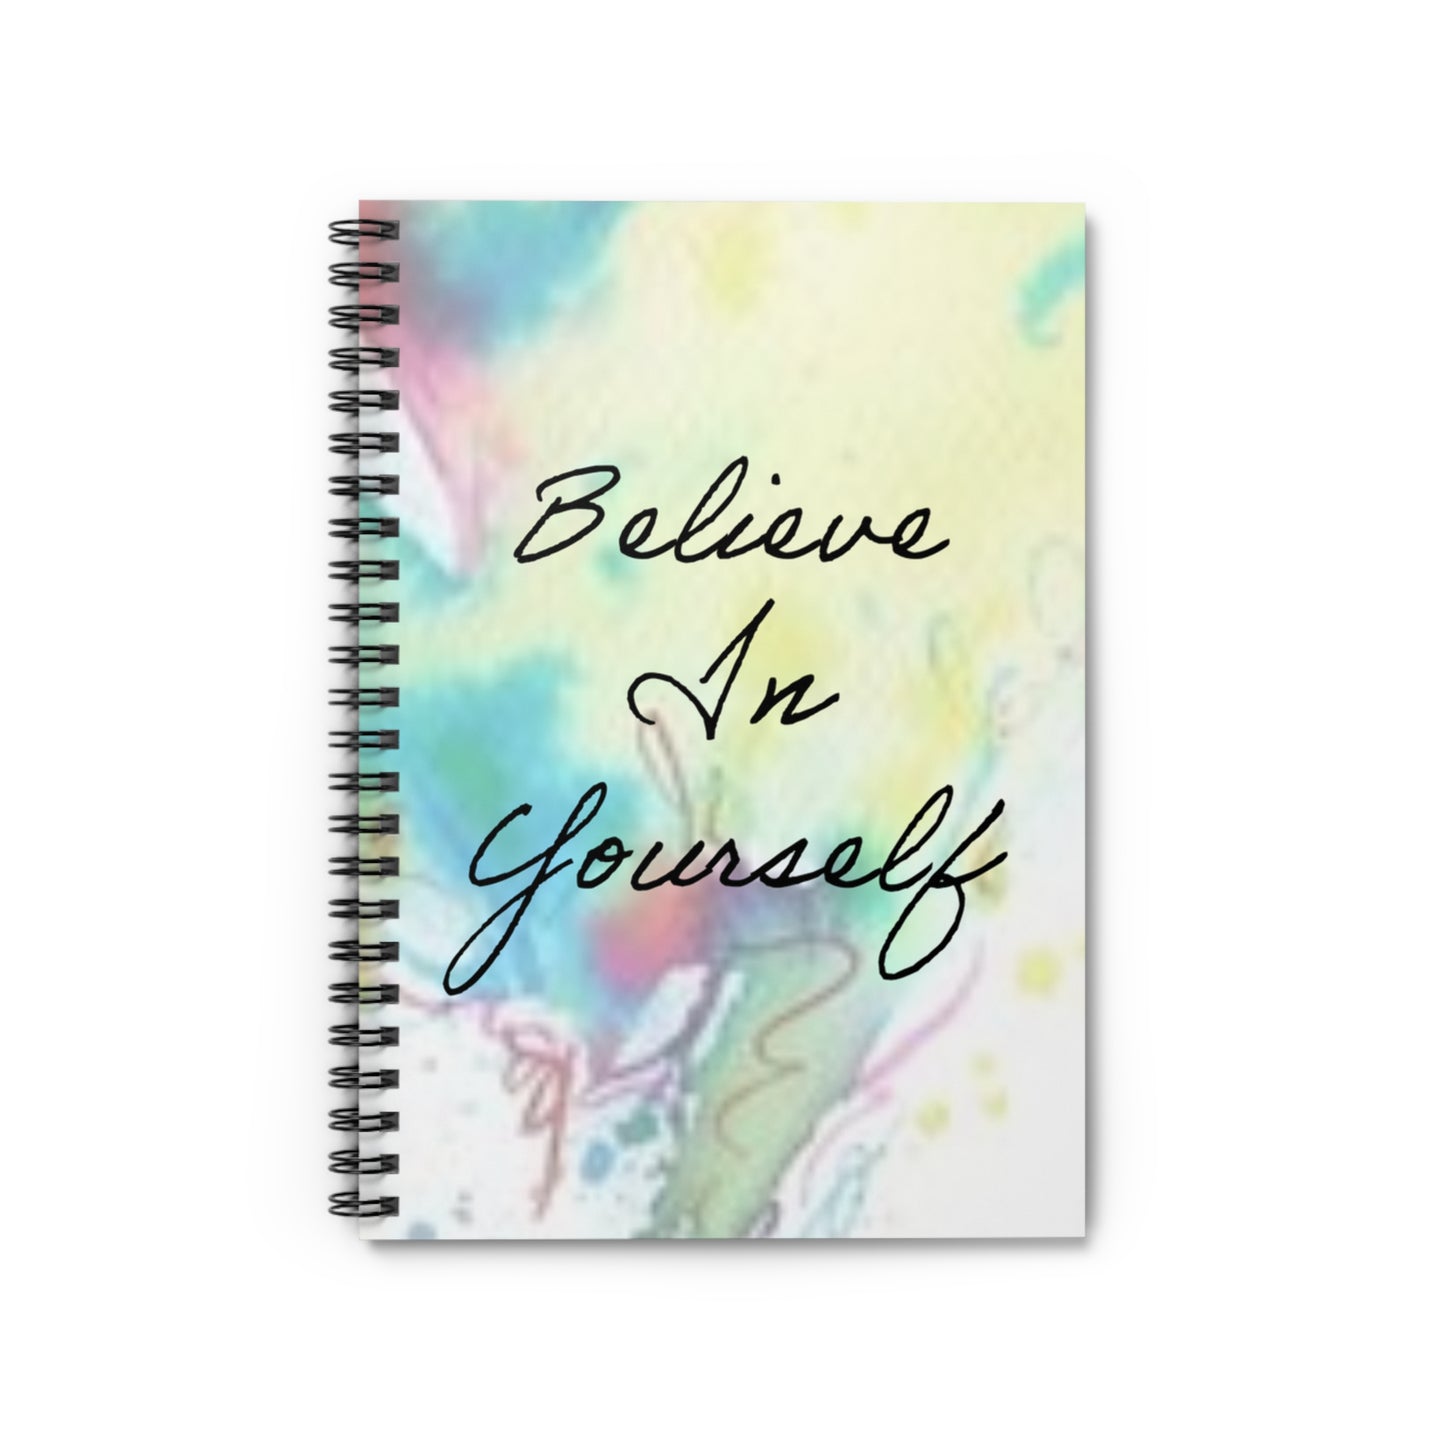 Believe in yourself Spiral Notebook - Ruled Line